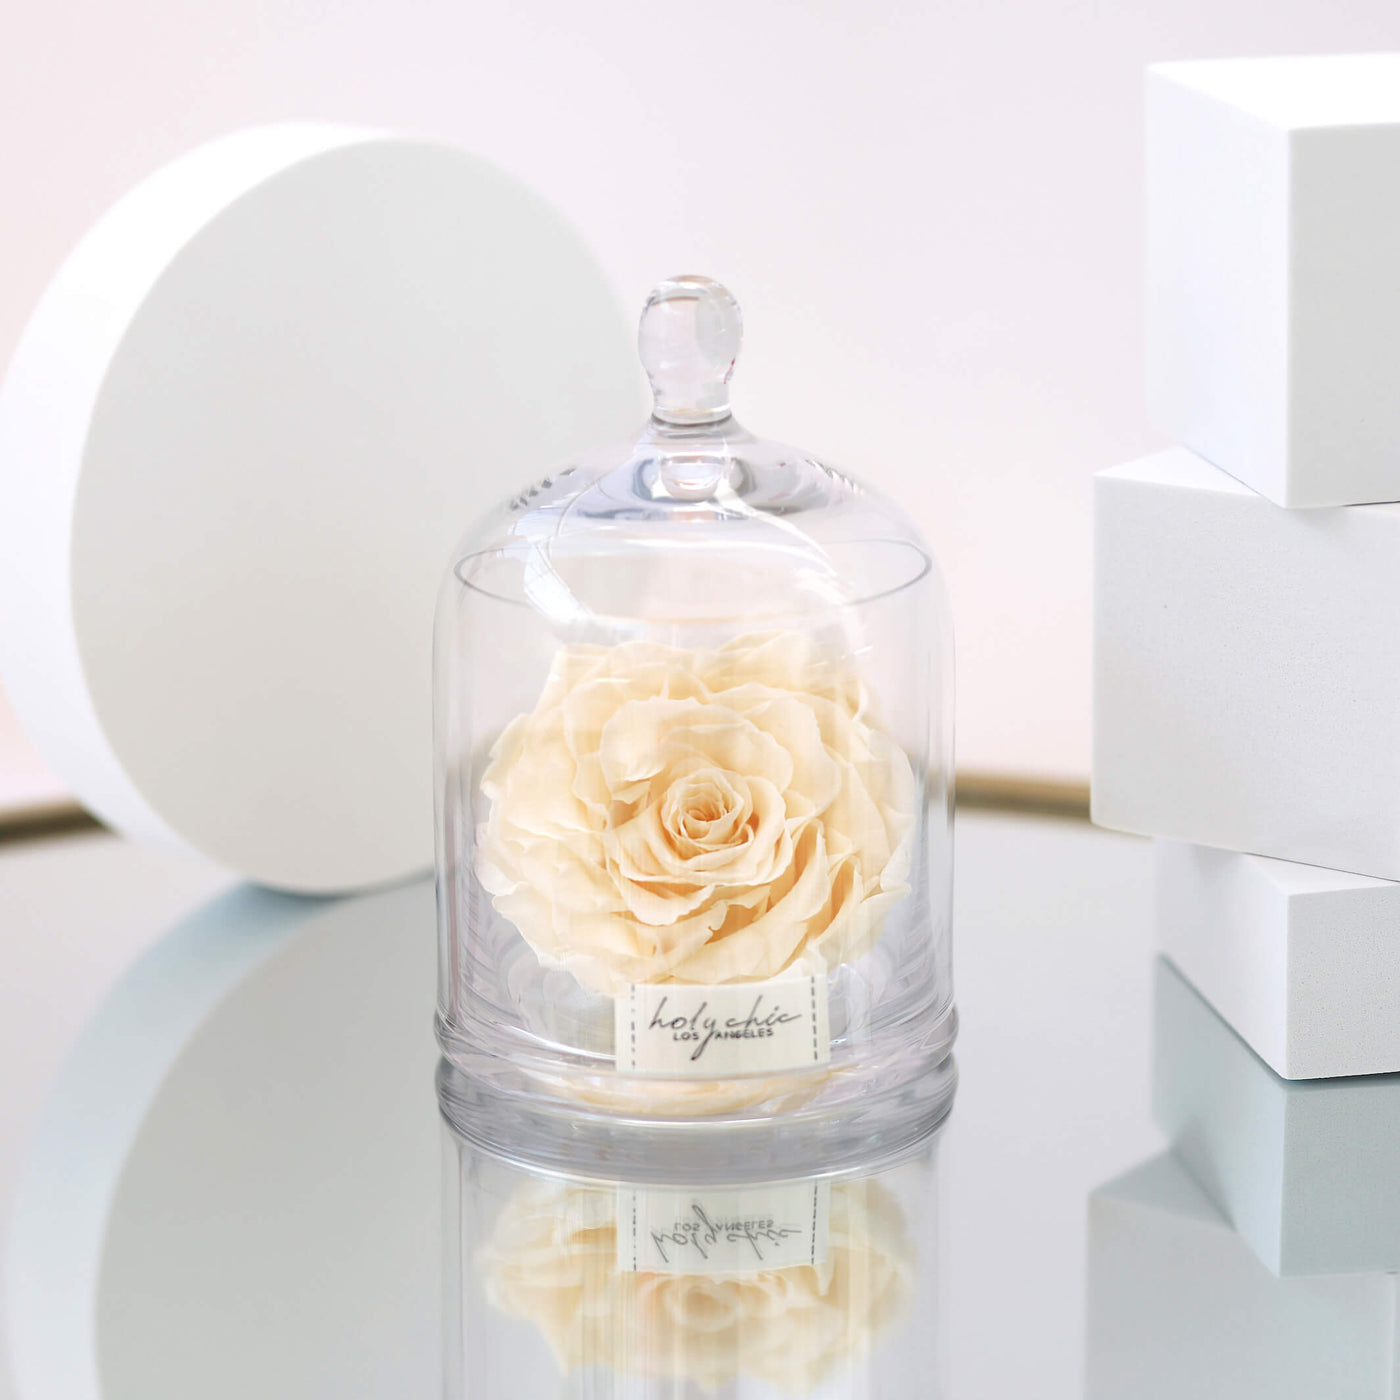 Large forever rose in a clear glass dome